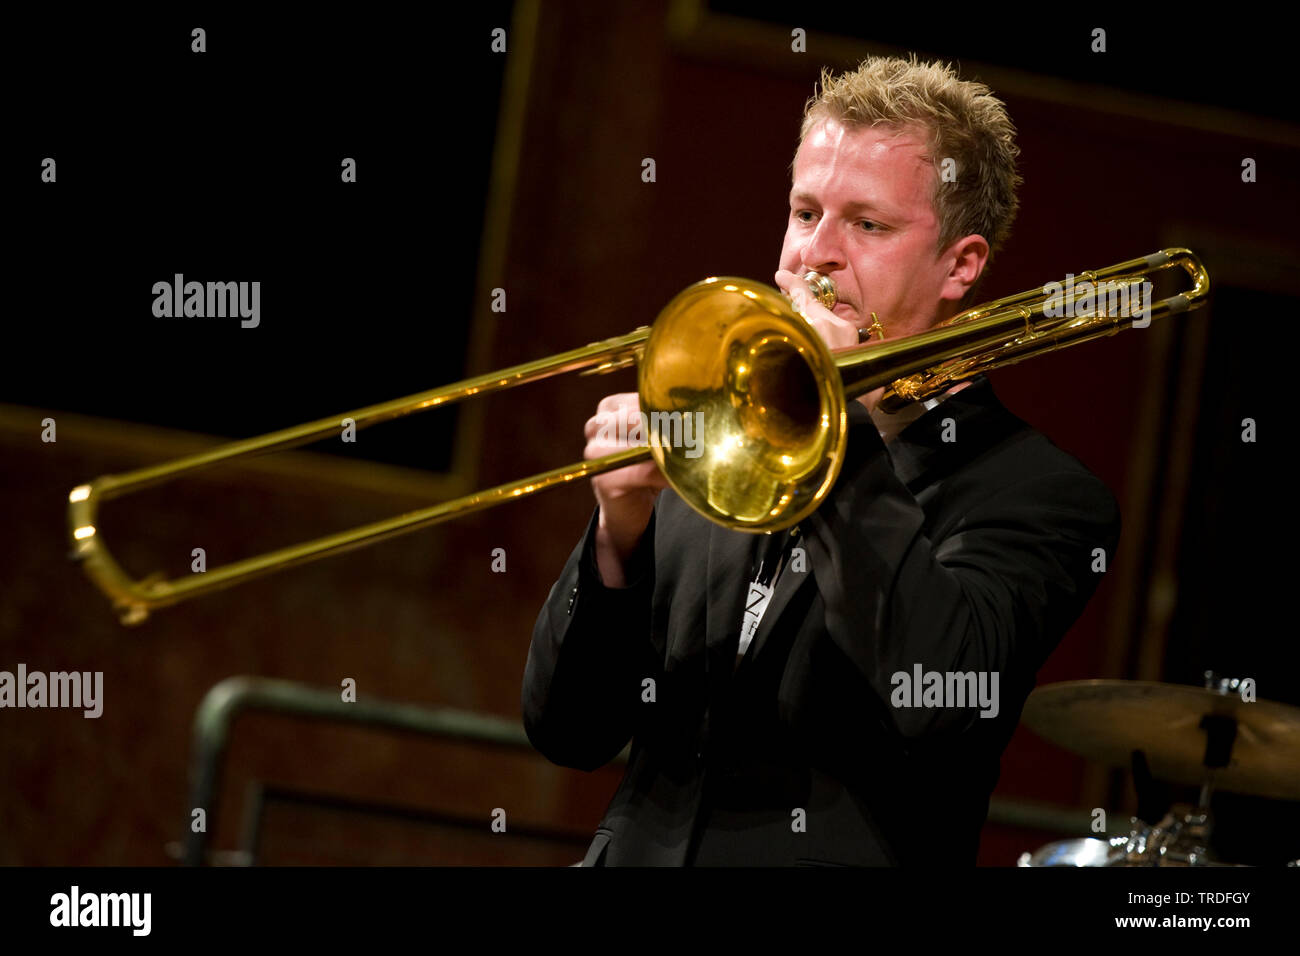 Several trumpeter playing in a concert hall Stock Photo